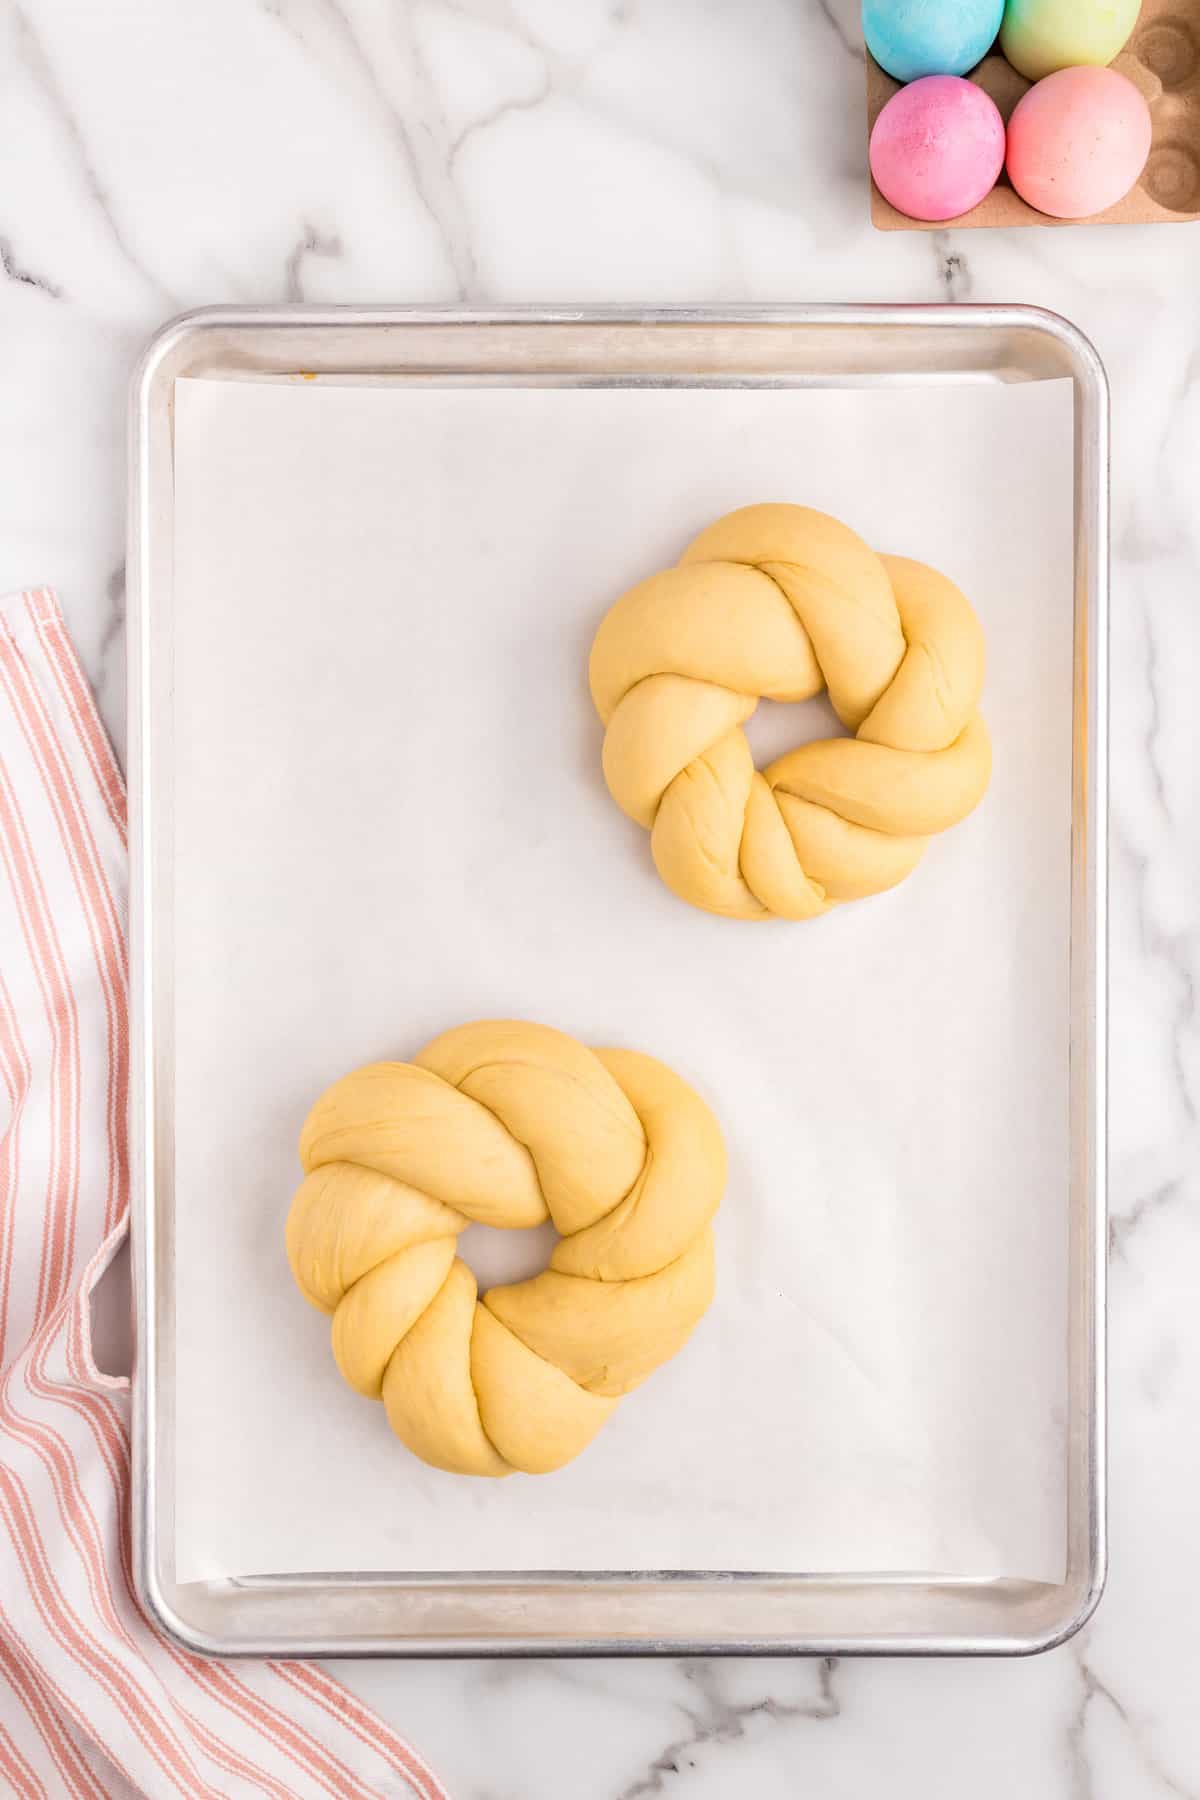 Adding Italian Easter Bread to parchment lined baking sheet